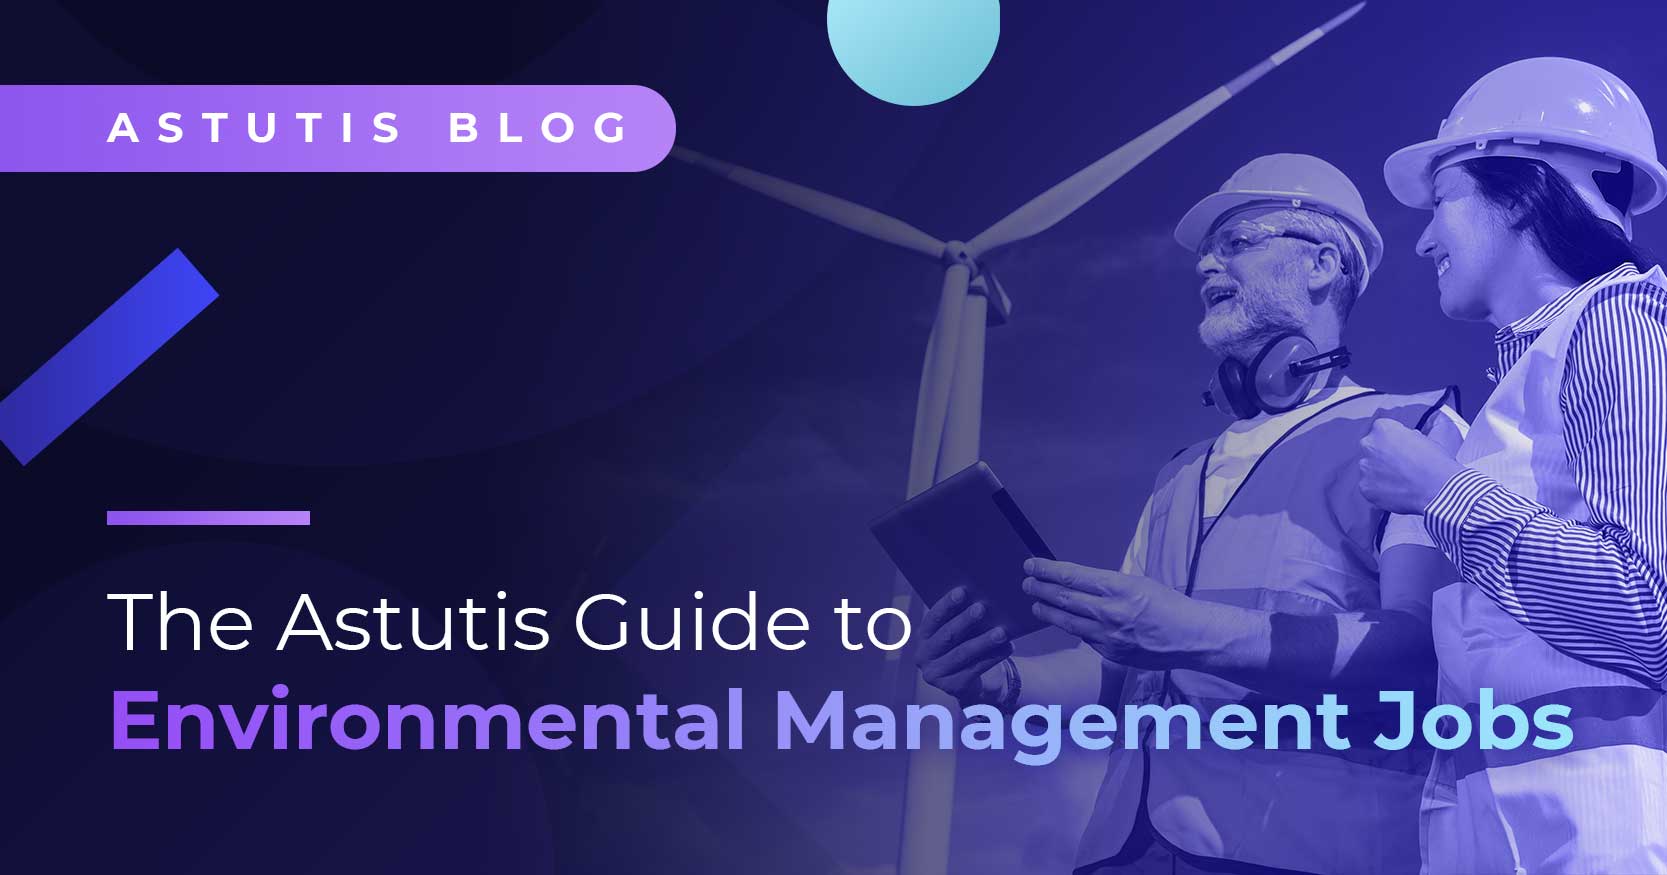 The Astutis Guide to Environmental Management Jobs  Image